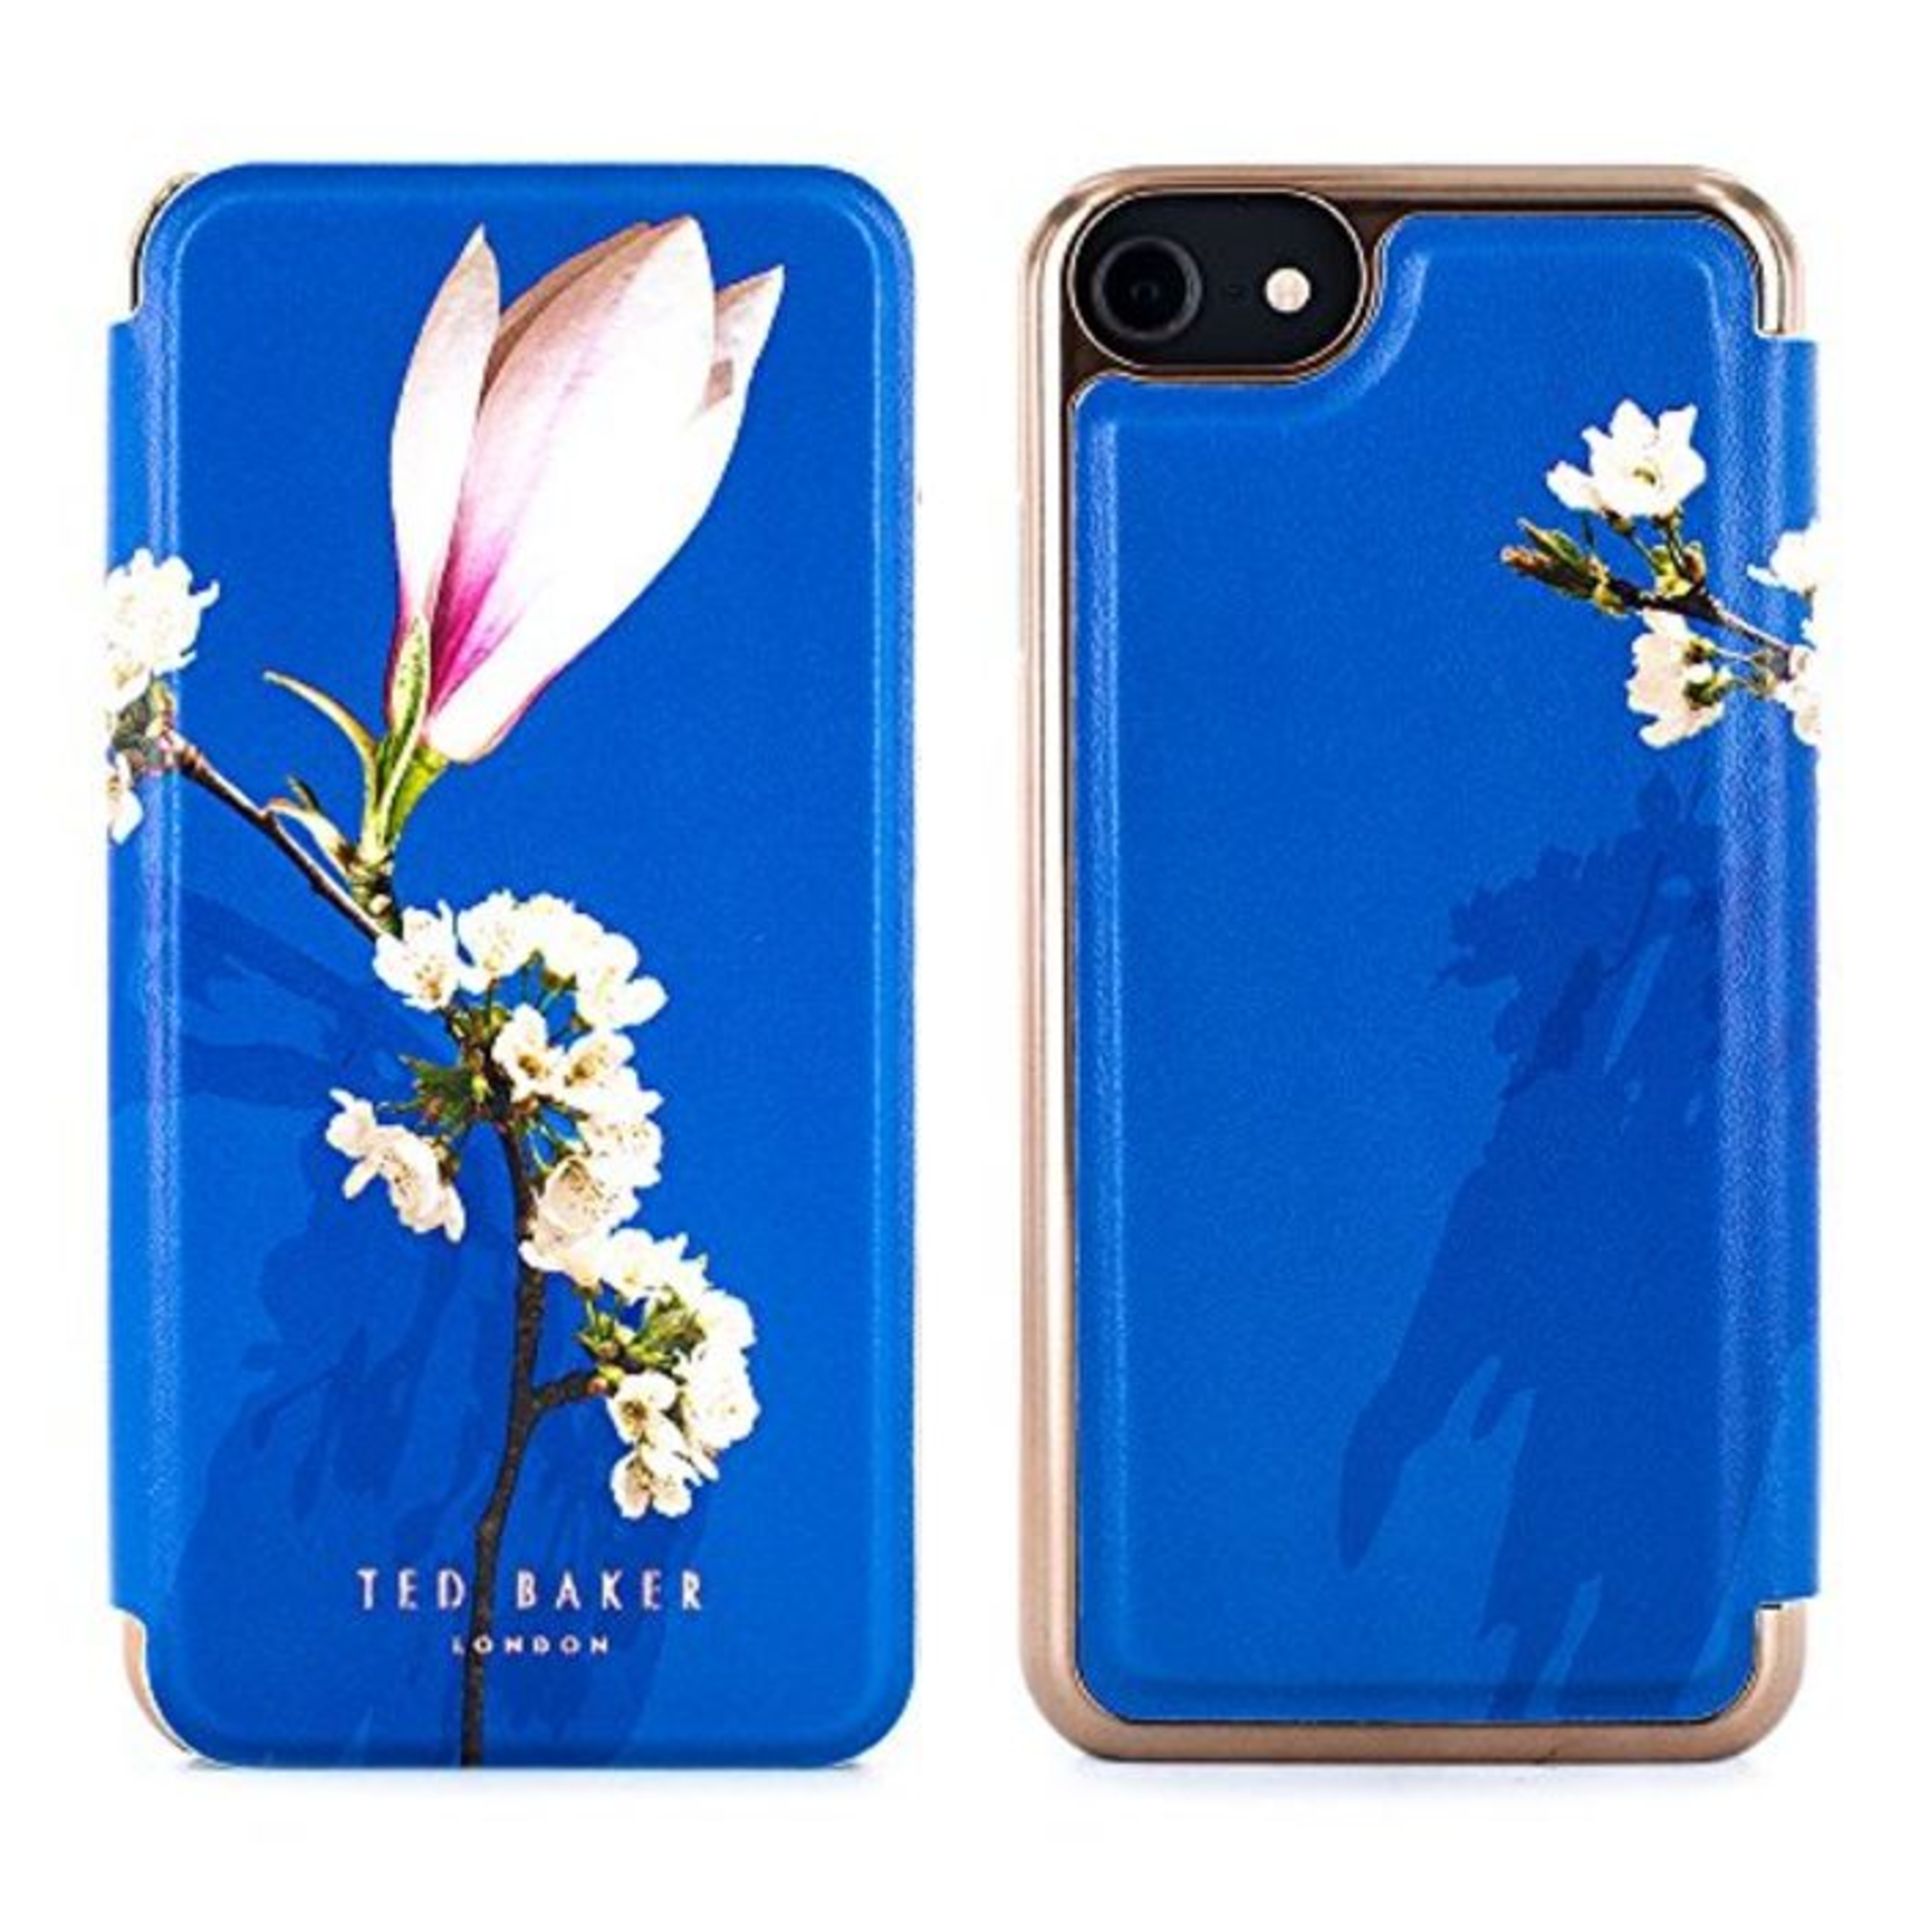 Ted Baker BRYONY Premium Mirror Folio Case for iPhone 8/7 - Harmony Mineral